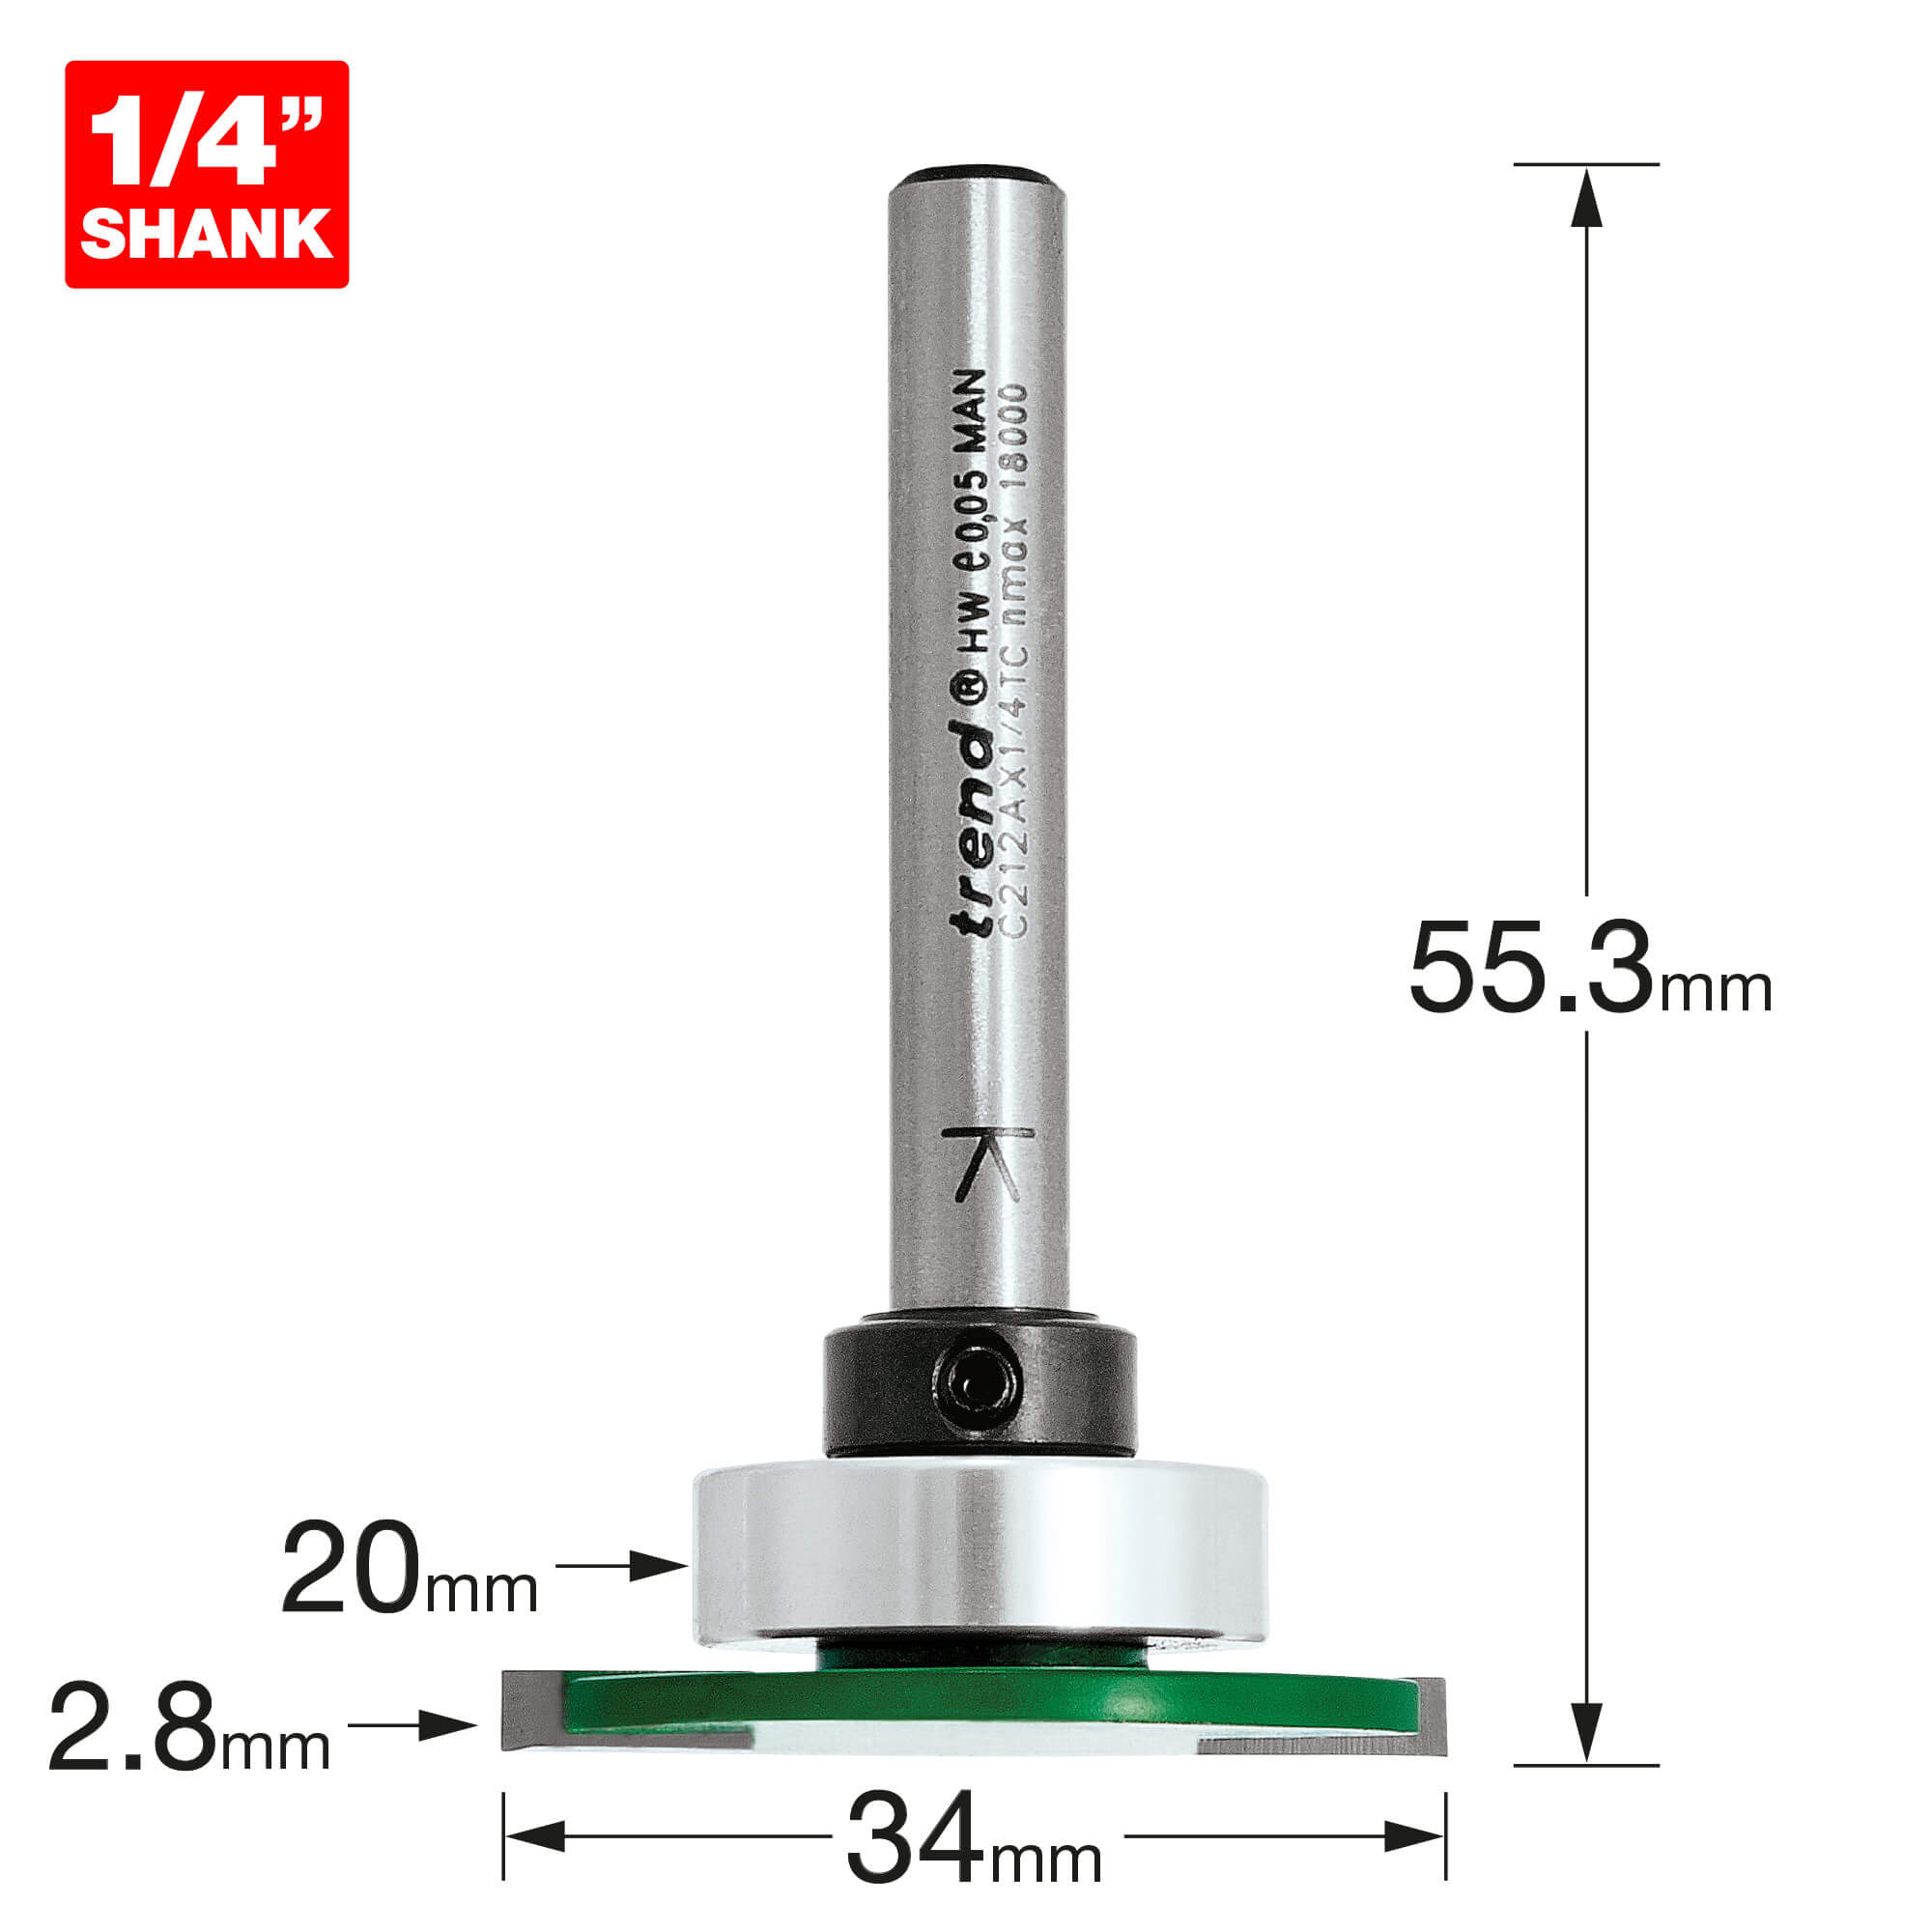 Image of Trend CRAFTPRO Weatherseal Groover Router Cutter 34mm 2.8mm 1/4"